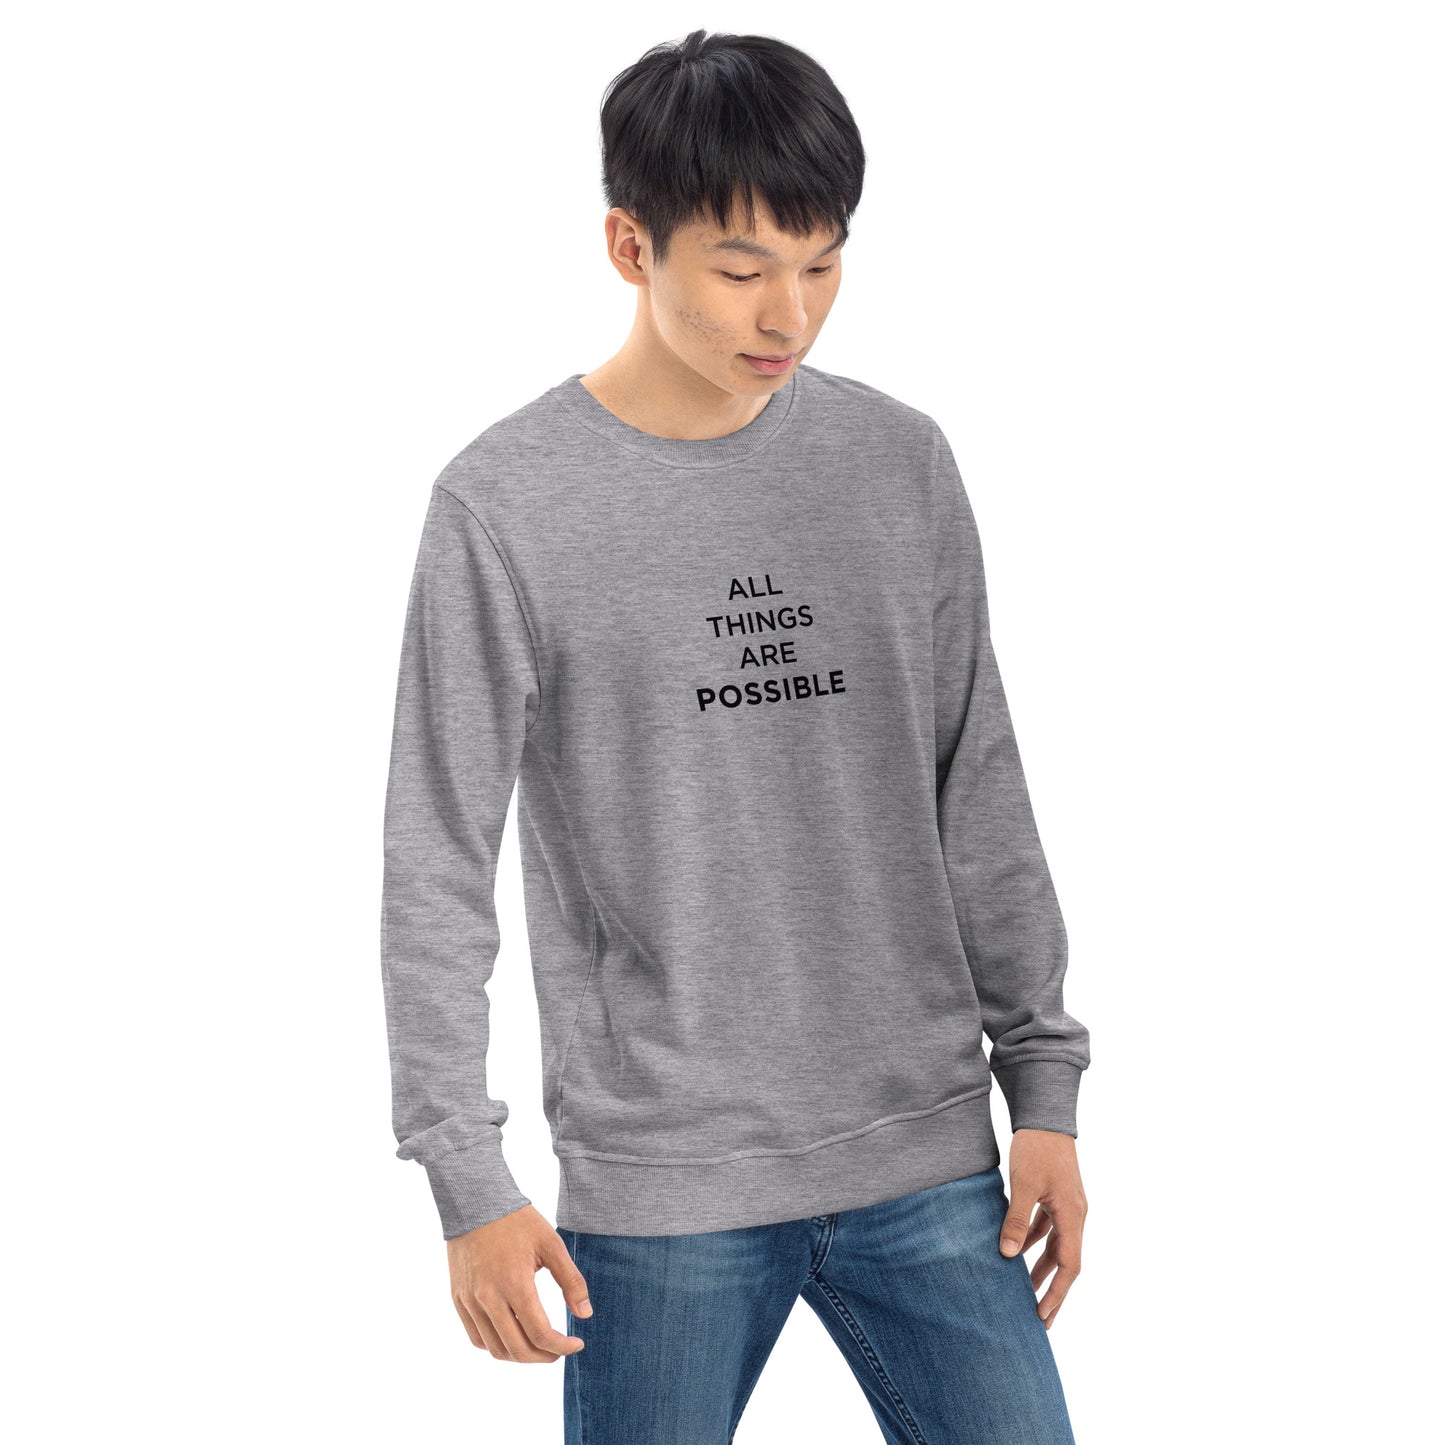 All Things Are Possible Men's Organic Cotton Sweatshirt